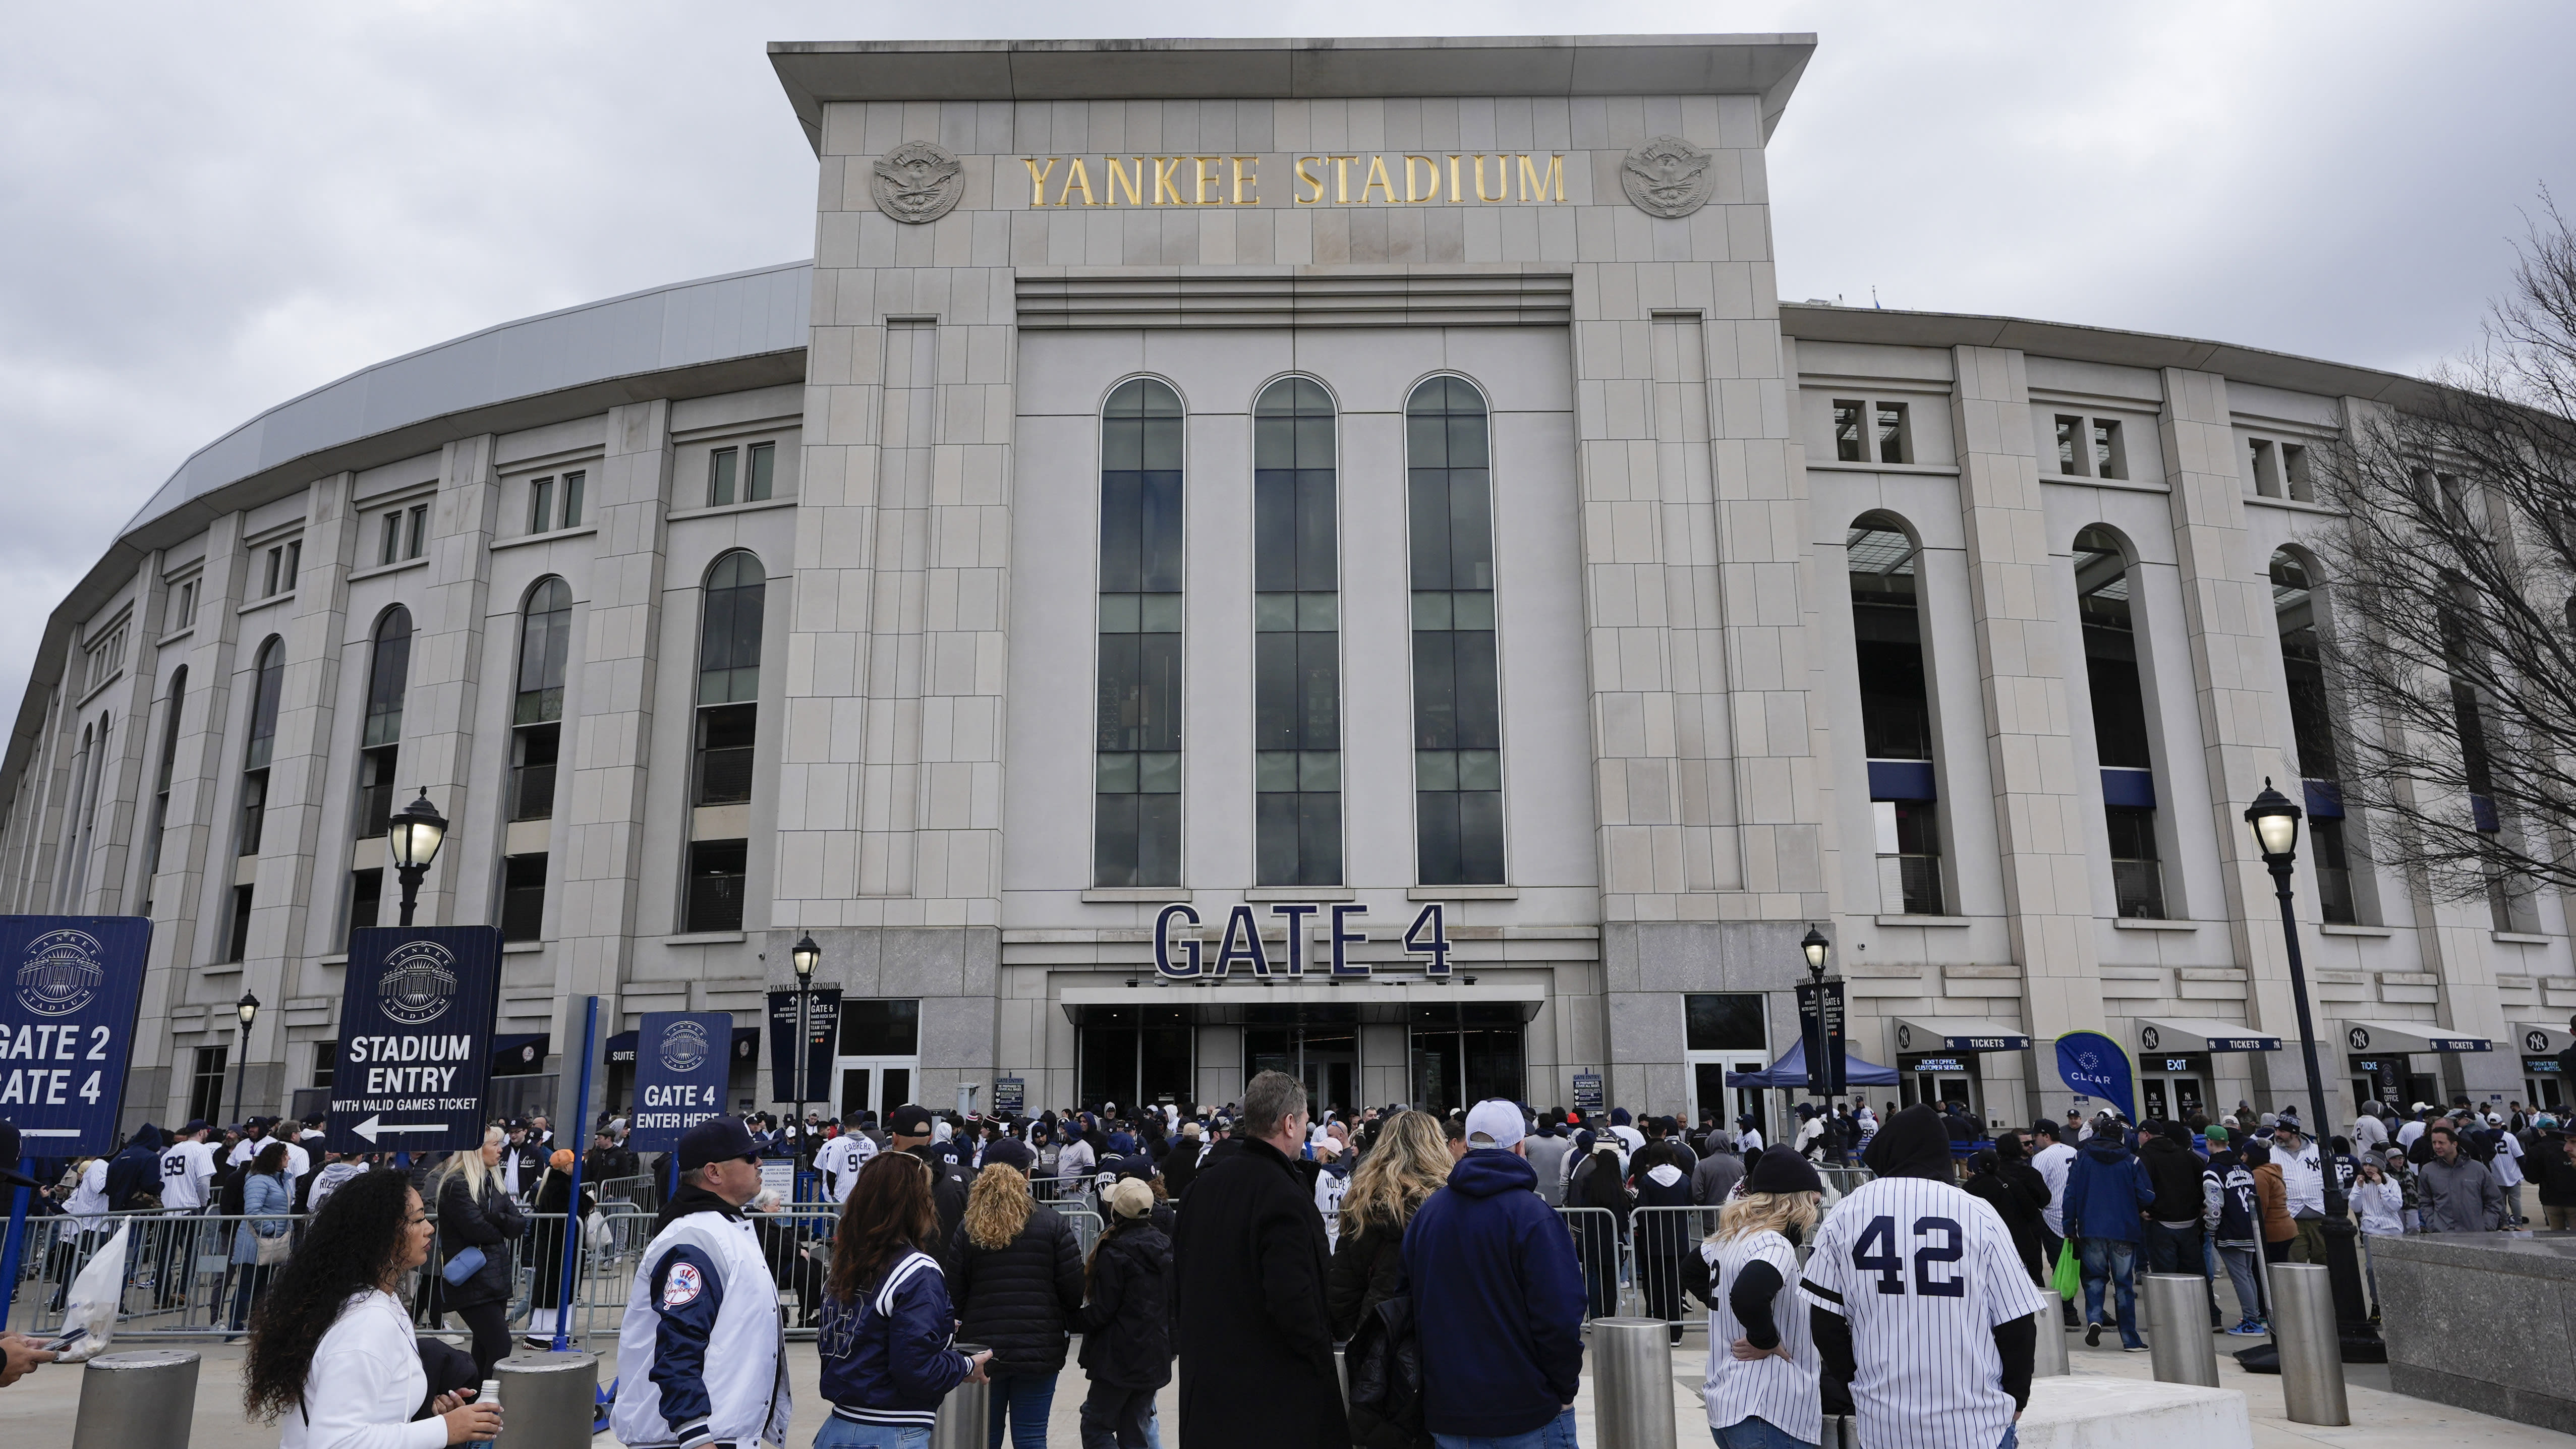 An earthquake in New Jersey shook Yankee Stadium before the home opener